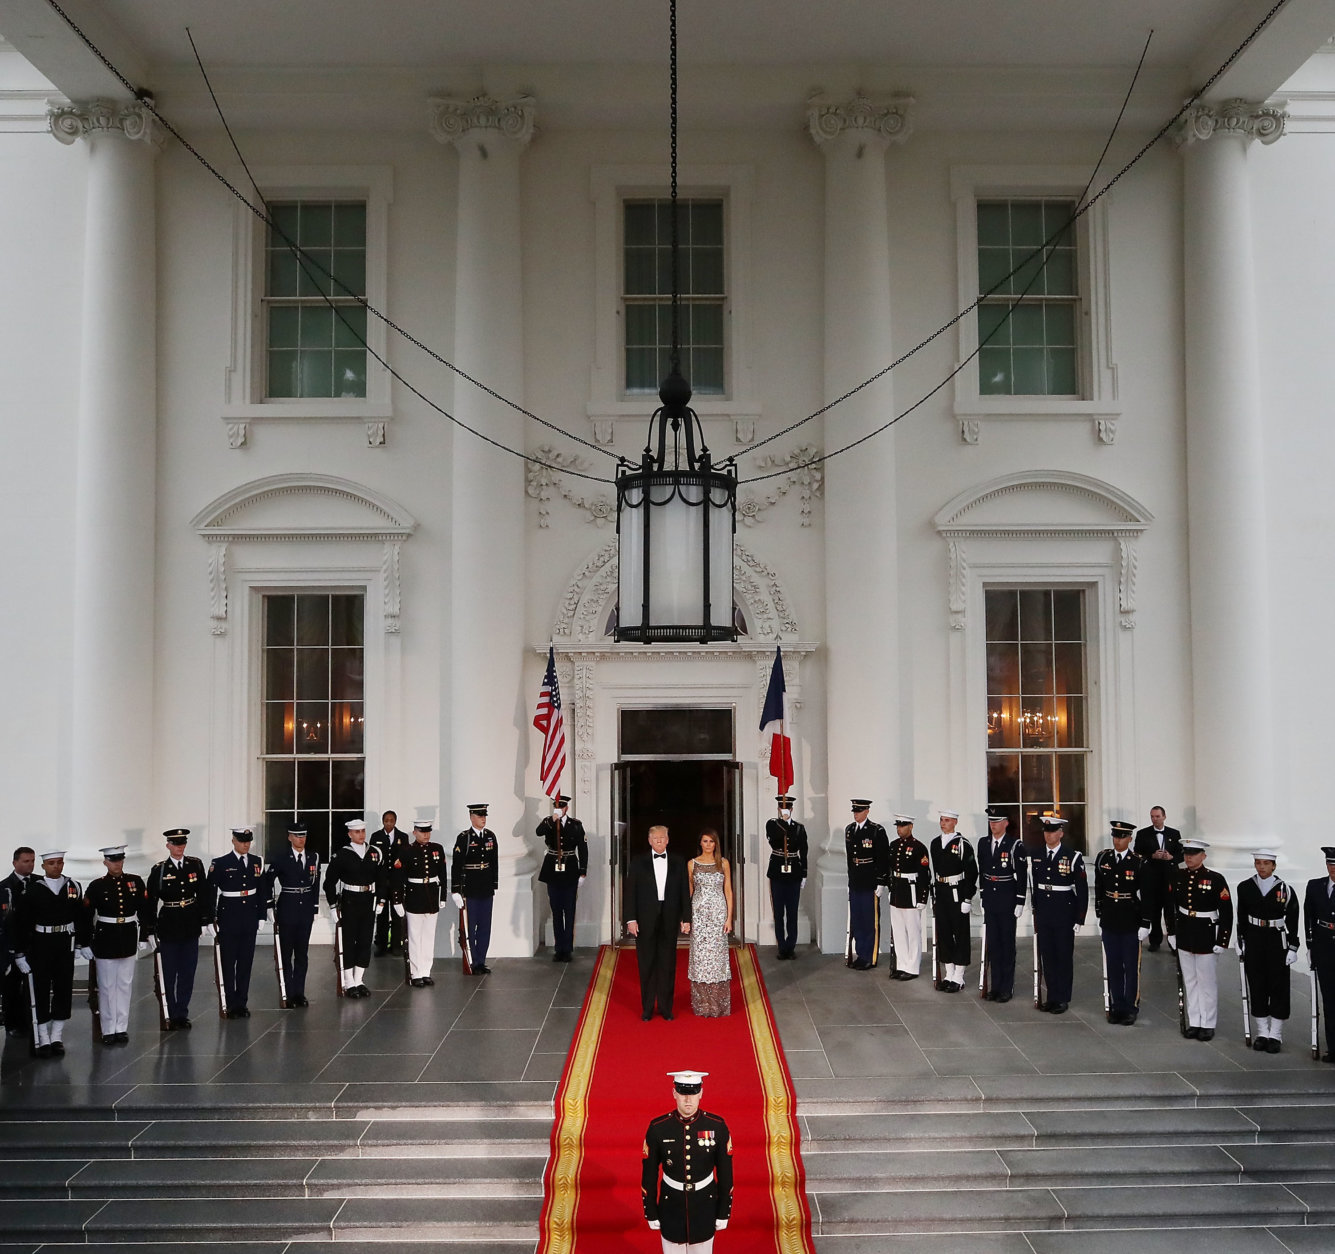 WASHINGTON, DC - APRIL 24:  U.S President Donald Trump, and U.S. first lady Melania Trump wait for the arrival of French President Emmanuel Macron, French first lady Brigitte Macron at the North Portico for before a State Dinner at the White House April 24, 2018 in Washington, DC. Trump is hosting Macron for a two-day official visit that included dinner at George Washington's Mount Vernon, a tree planting on the White House South Lawn and a joint news conference.  (Photo by Mark Wilson/Getty Images)